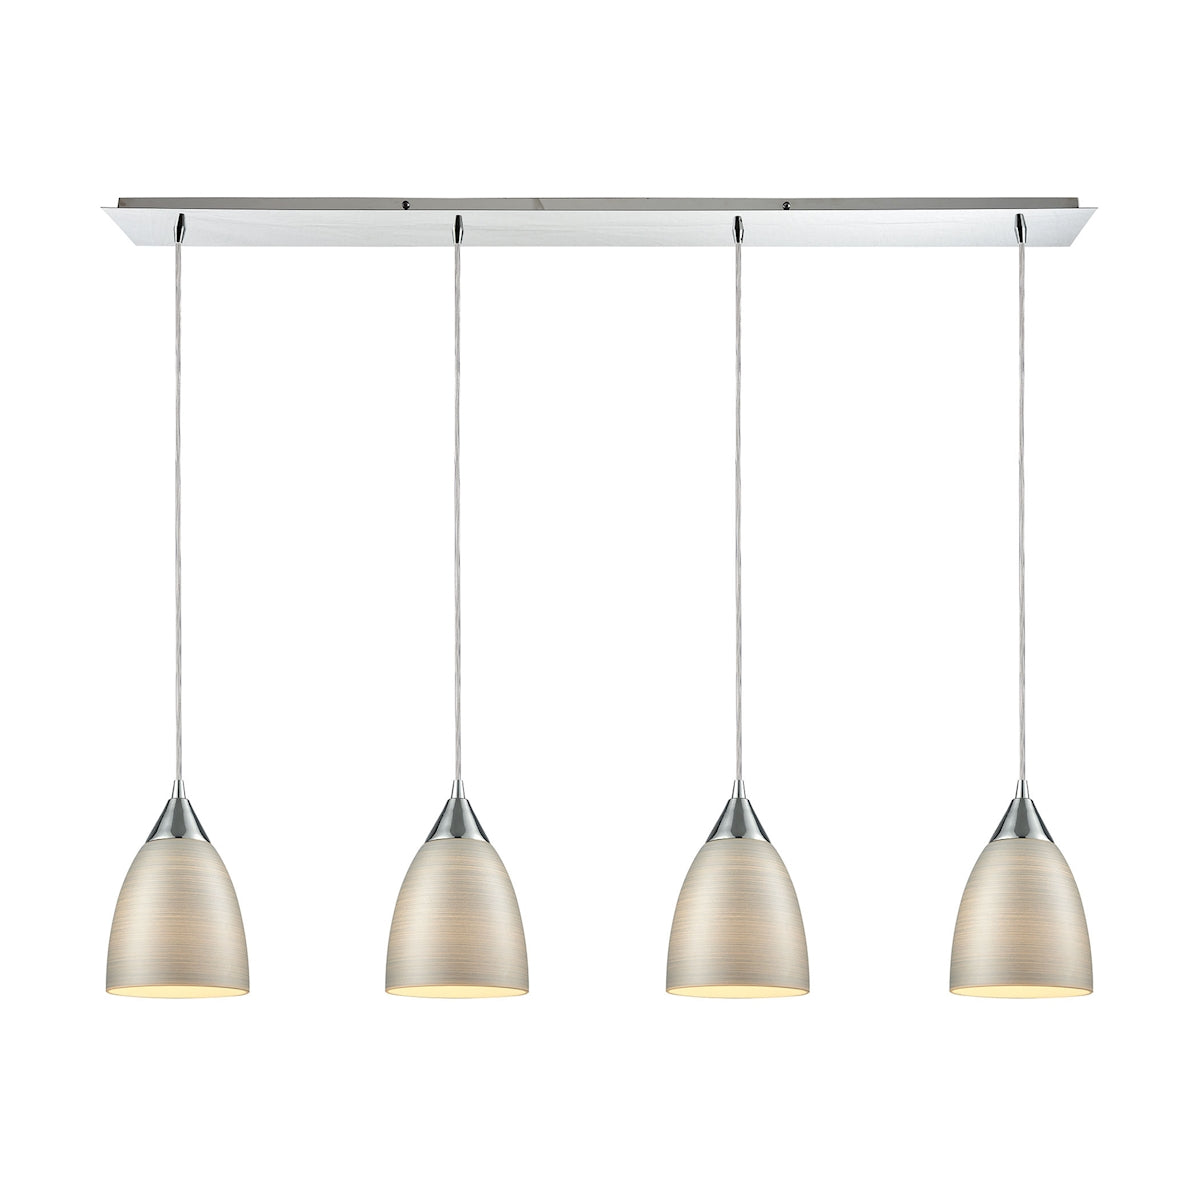 ELK Lighting 56530/4LP - Merida 46" Wide 4-Light Linear Pendant Fixture in Polished Chrome with Silv